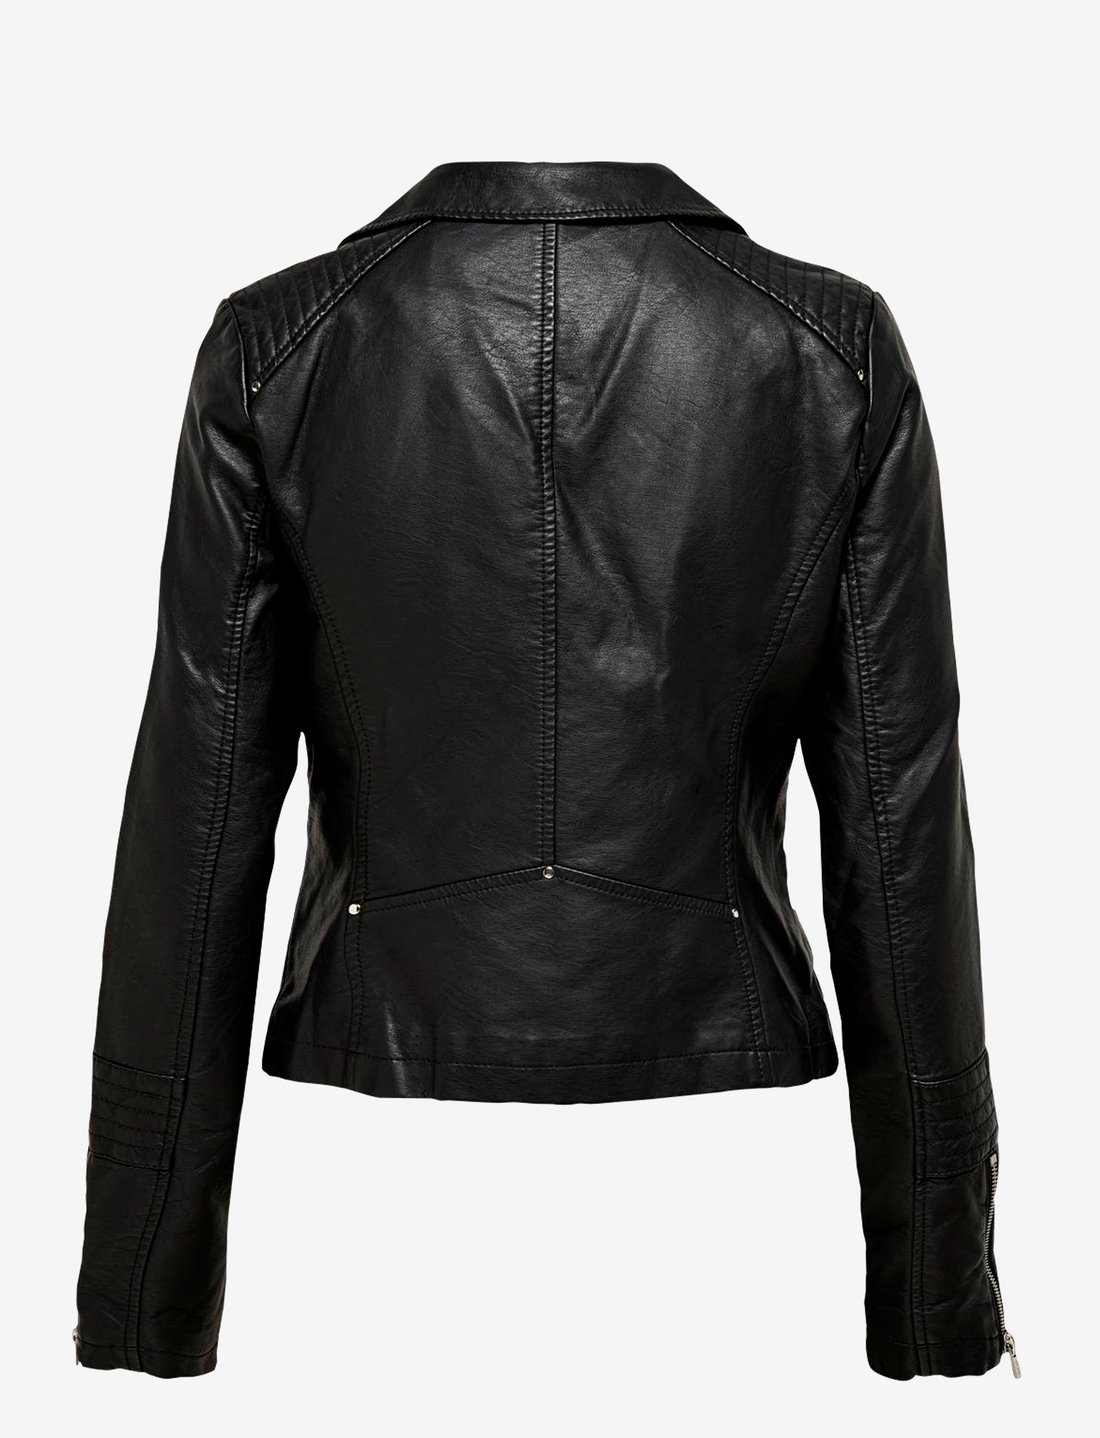 ONLY Onlgemma Faux Leather Biker Otw Noos - 42.49 €. Buy Leather jackets  from ONLY online at Boozt.com. Fast delivery and easy returns